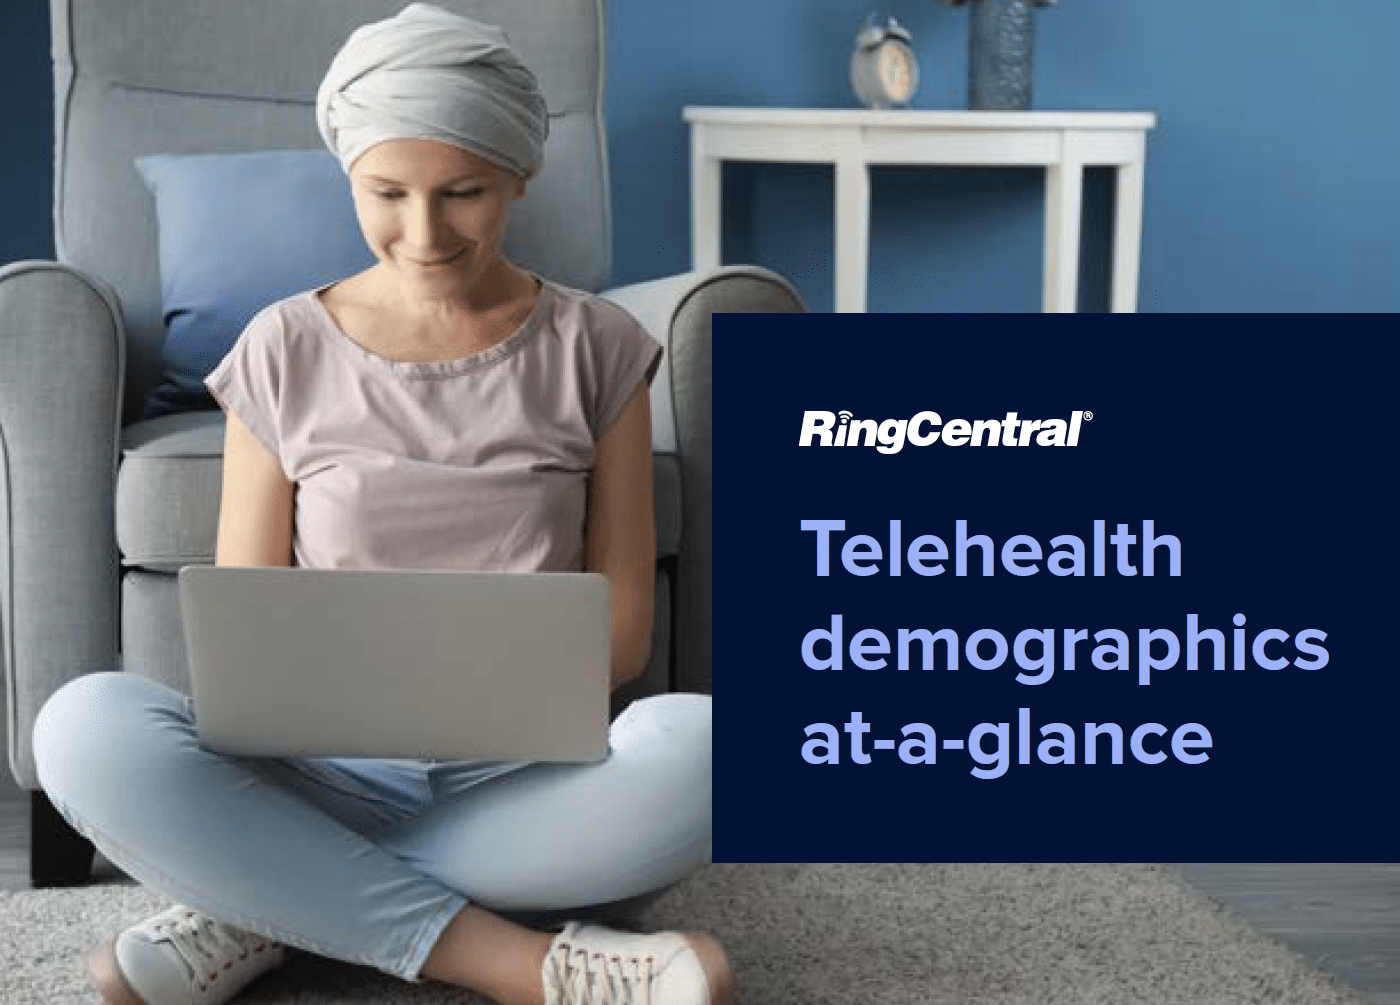 RingCentral's Telehealth demographics at-a-glance